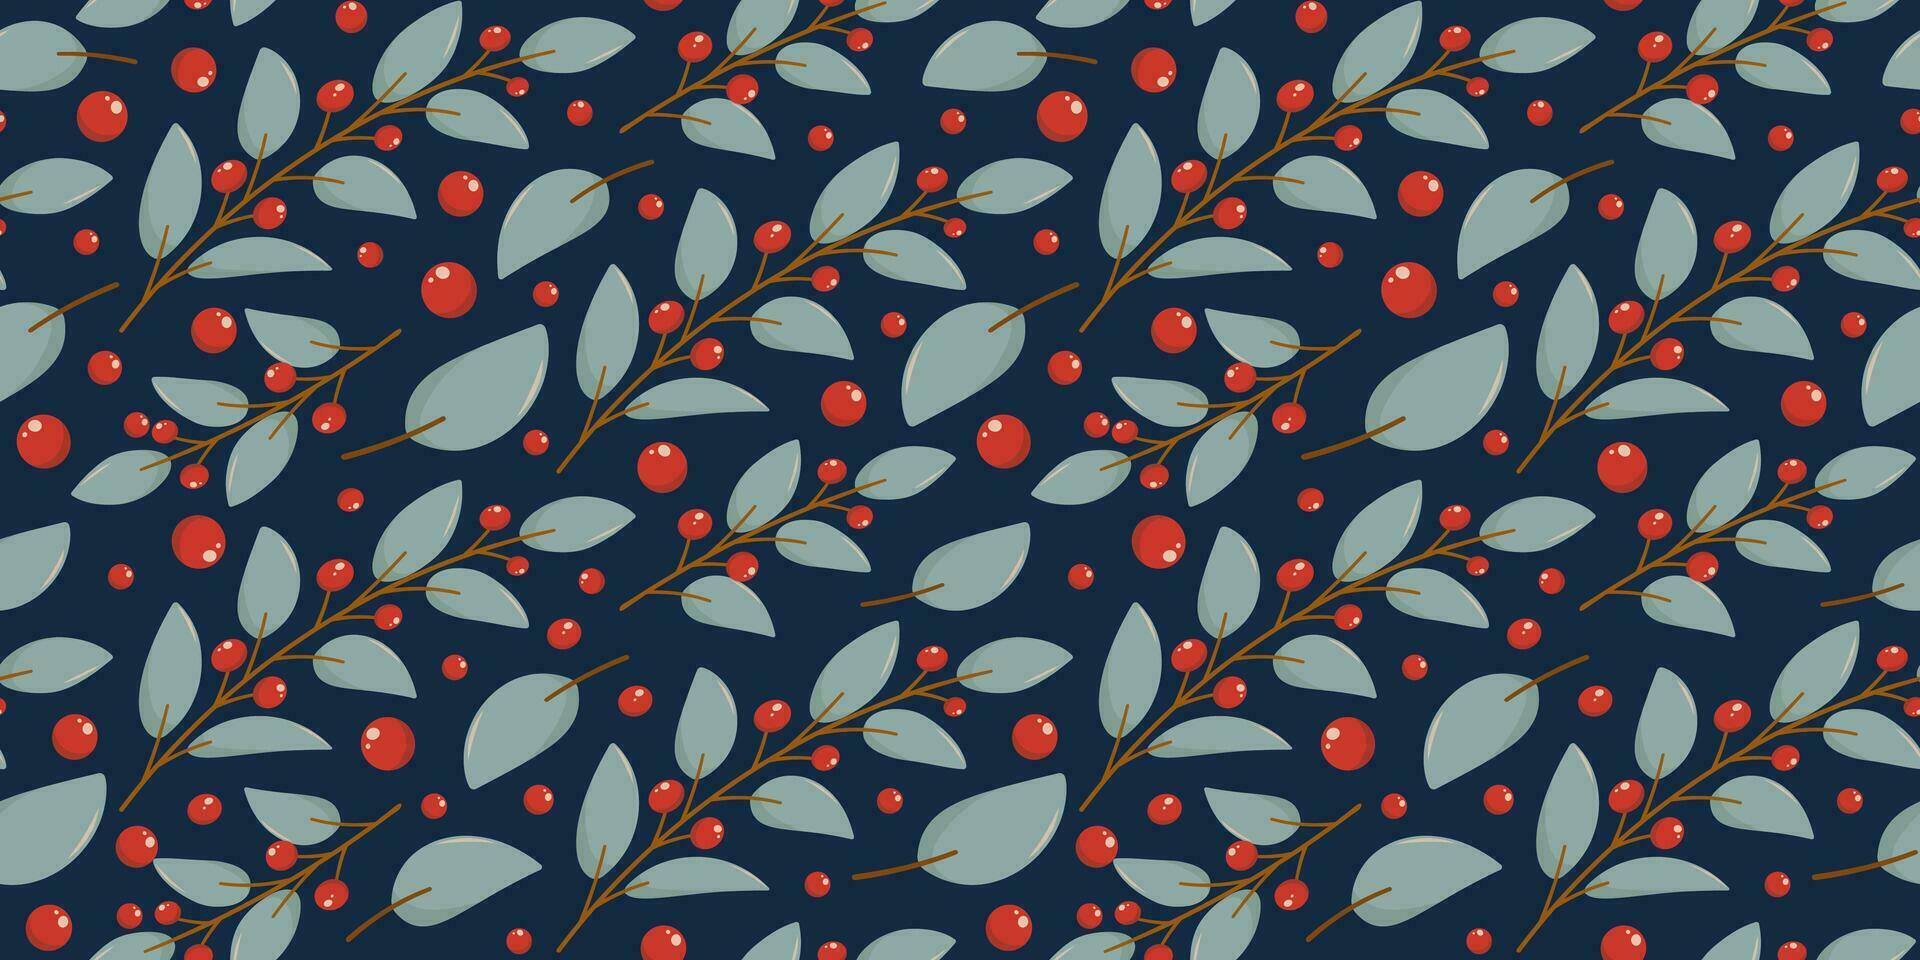 Winter rectangular seamless pattern on blue background with hand drawn christmas berries and leaves in flat vector style. Holiday seasonal floral decoration. For textile, background, wrapper